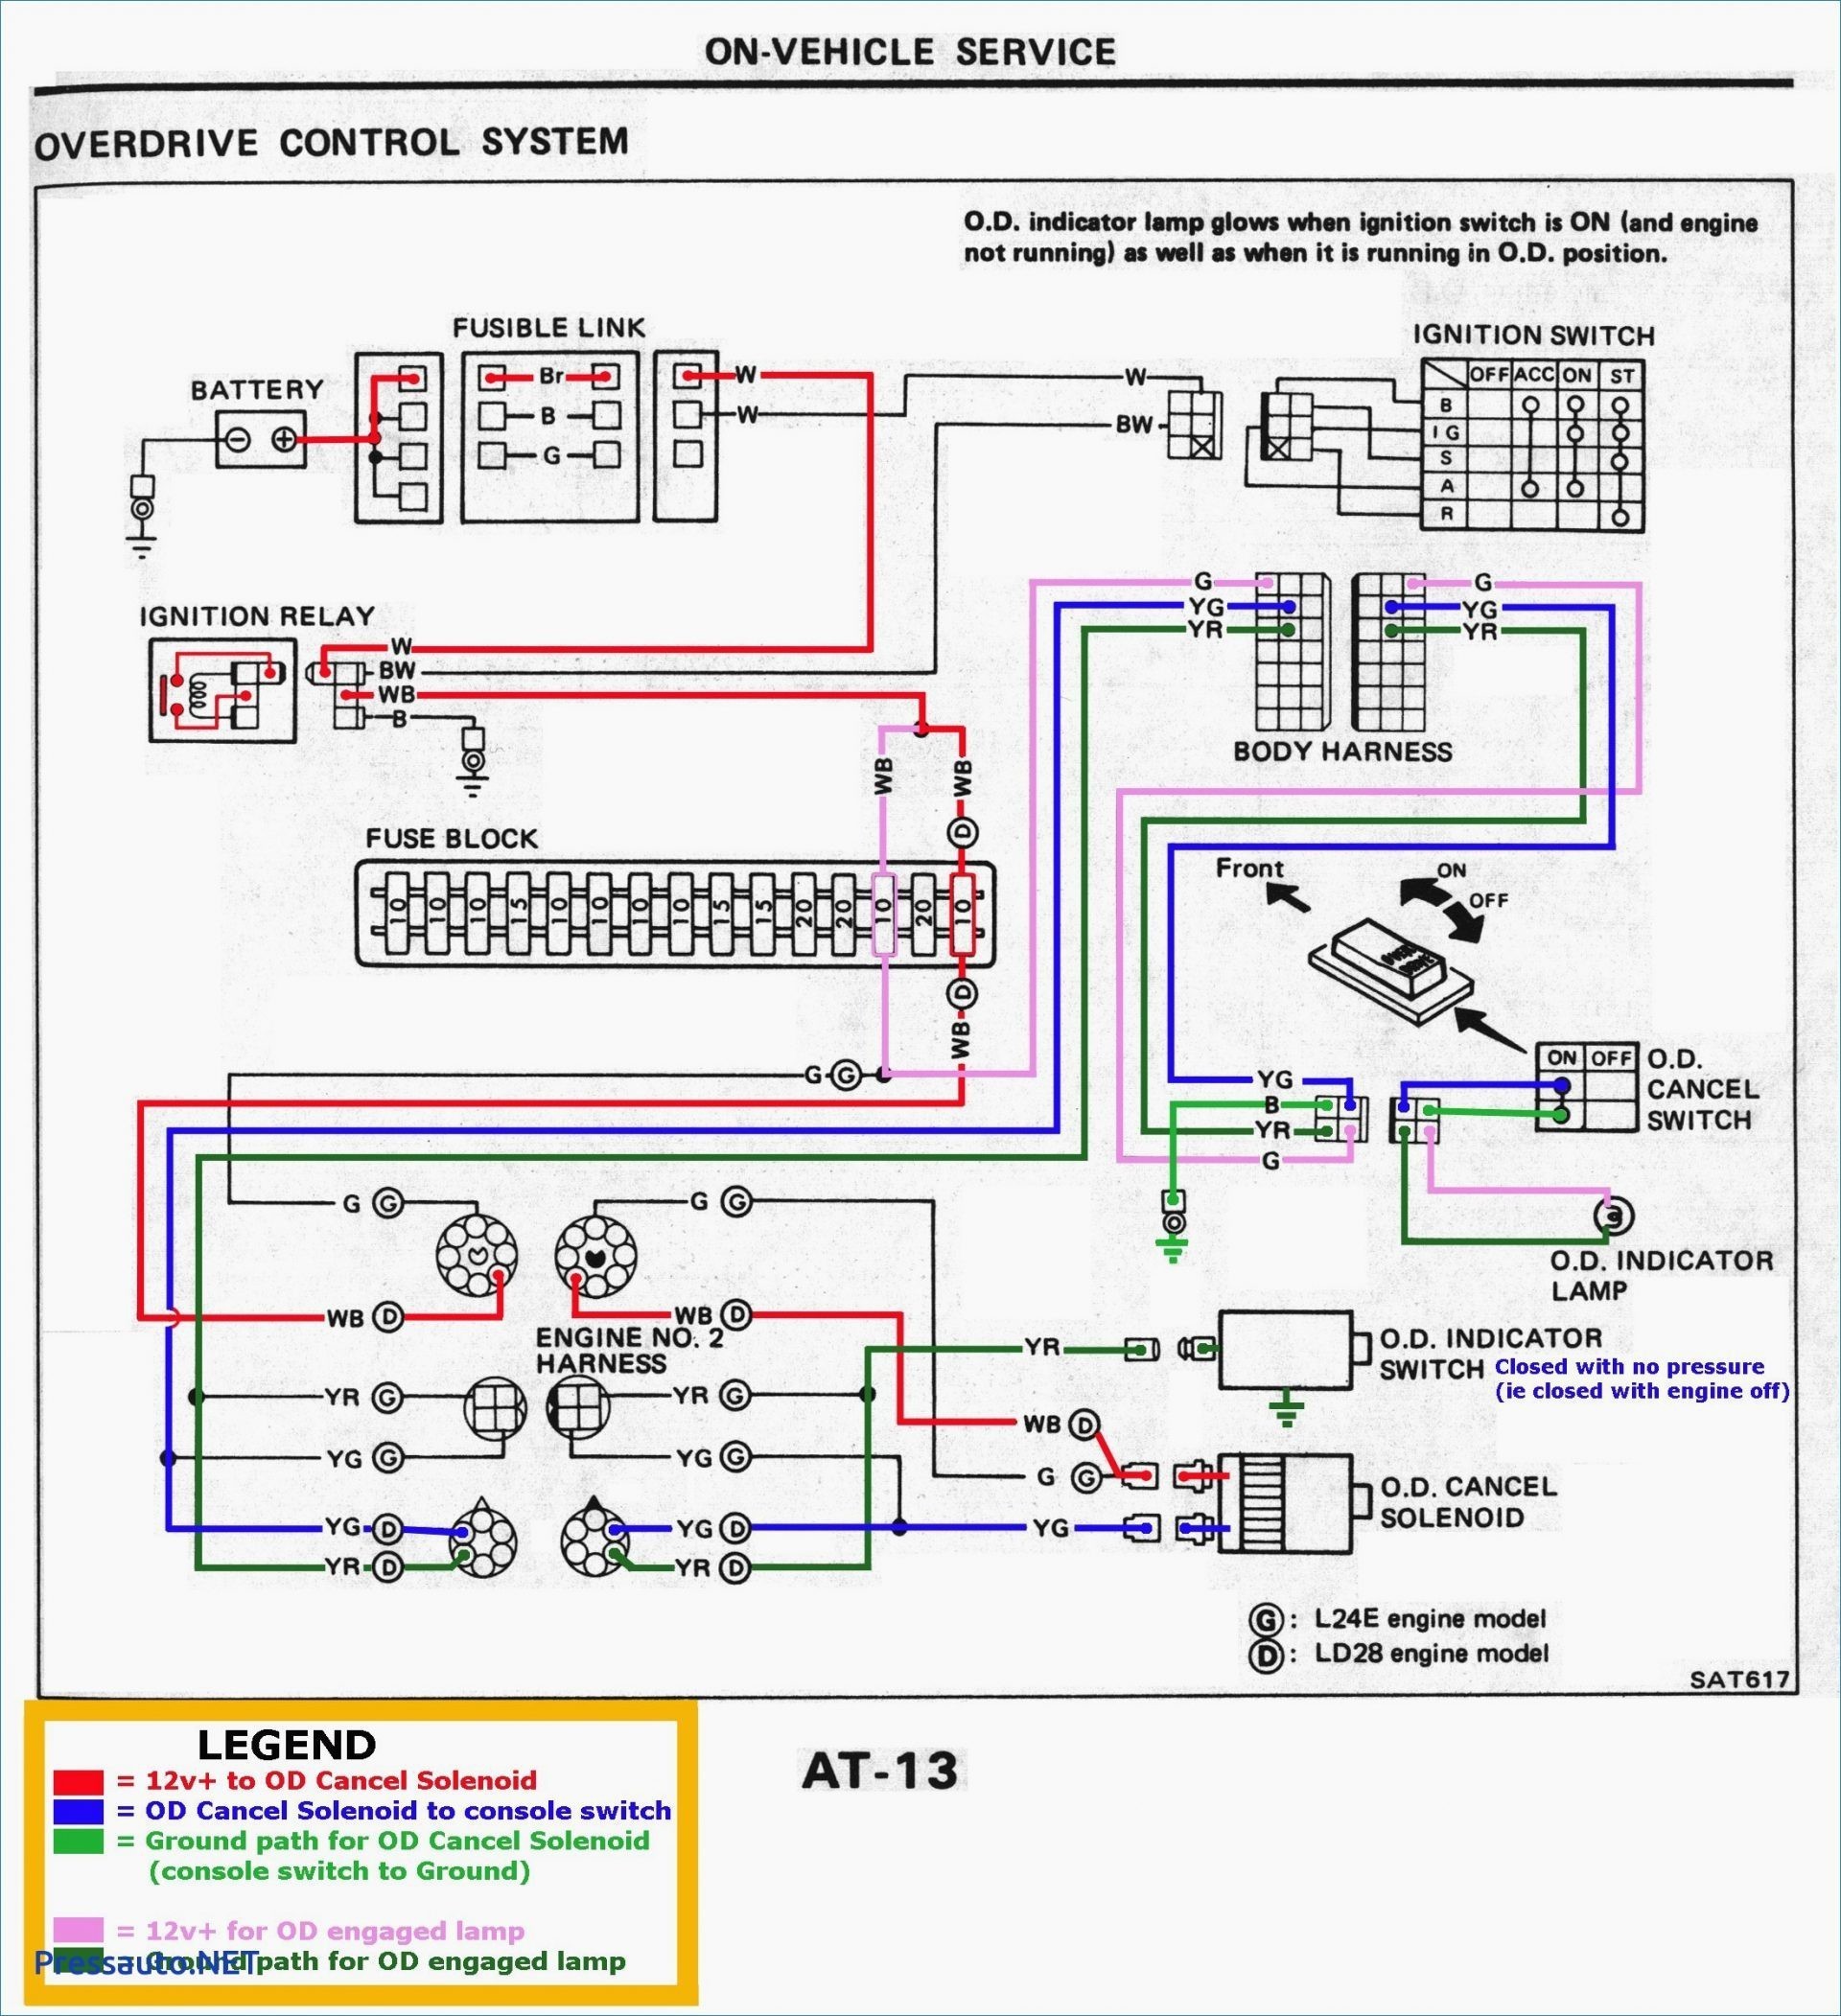 2003 chevy trailblazer tail light awesome wiring diagram for rear trailer lights save 2003 s10 tail lights of 2003 chevy trailblazer tail light